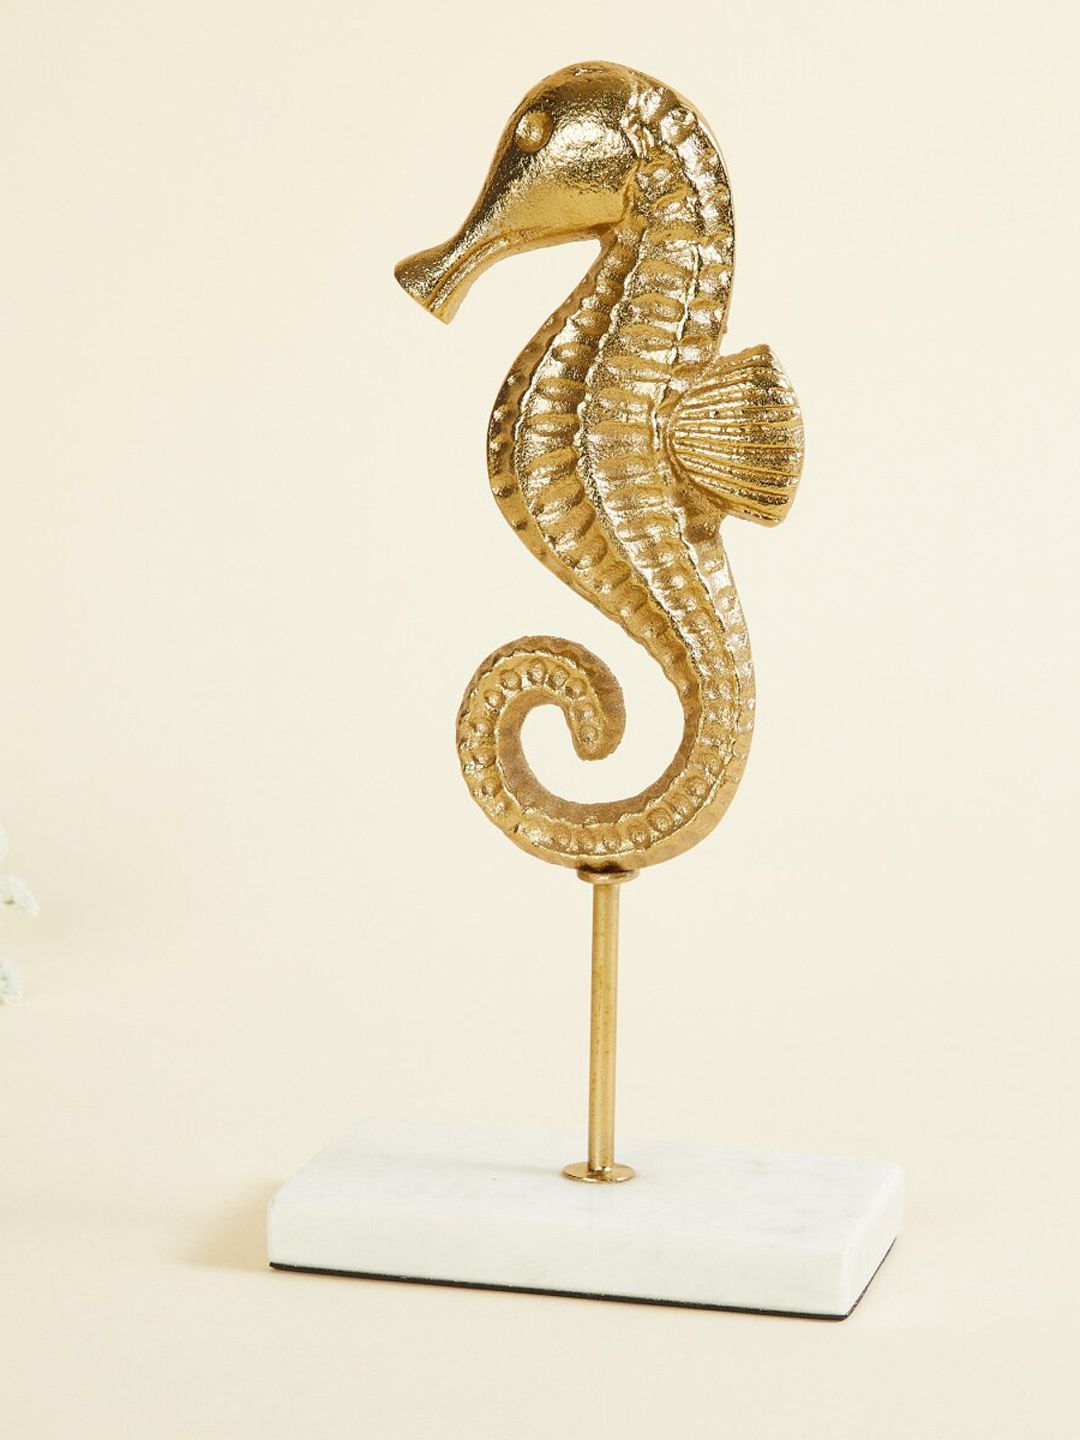 Home Centre Gold-Toned Textured Aluminum Sea Horse Figurine With Stand Showpiece Price in India